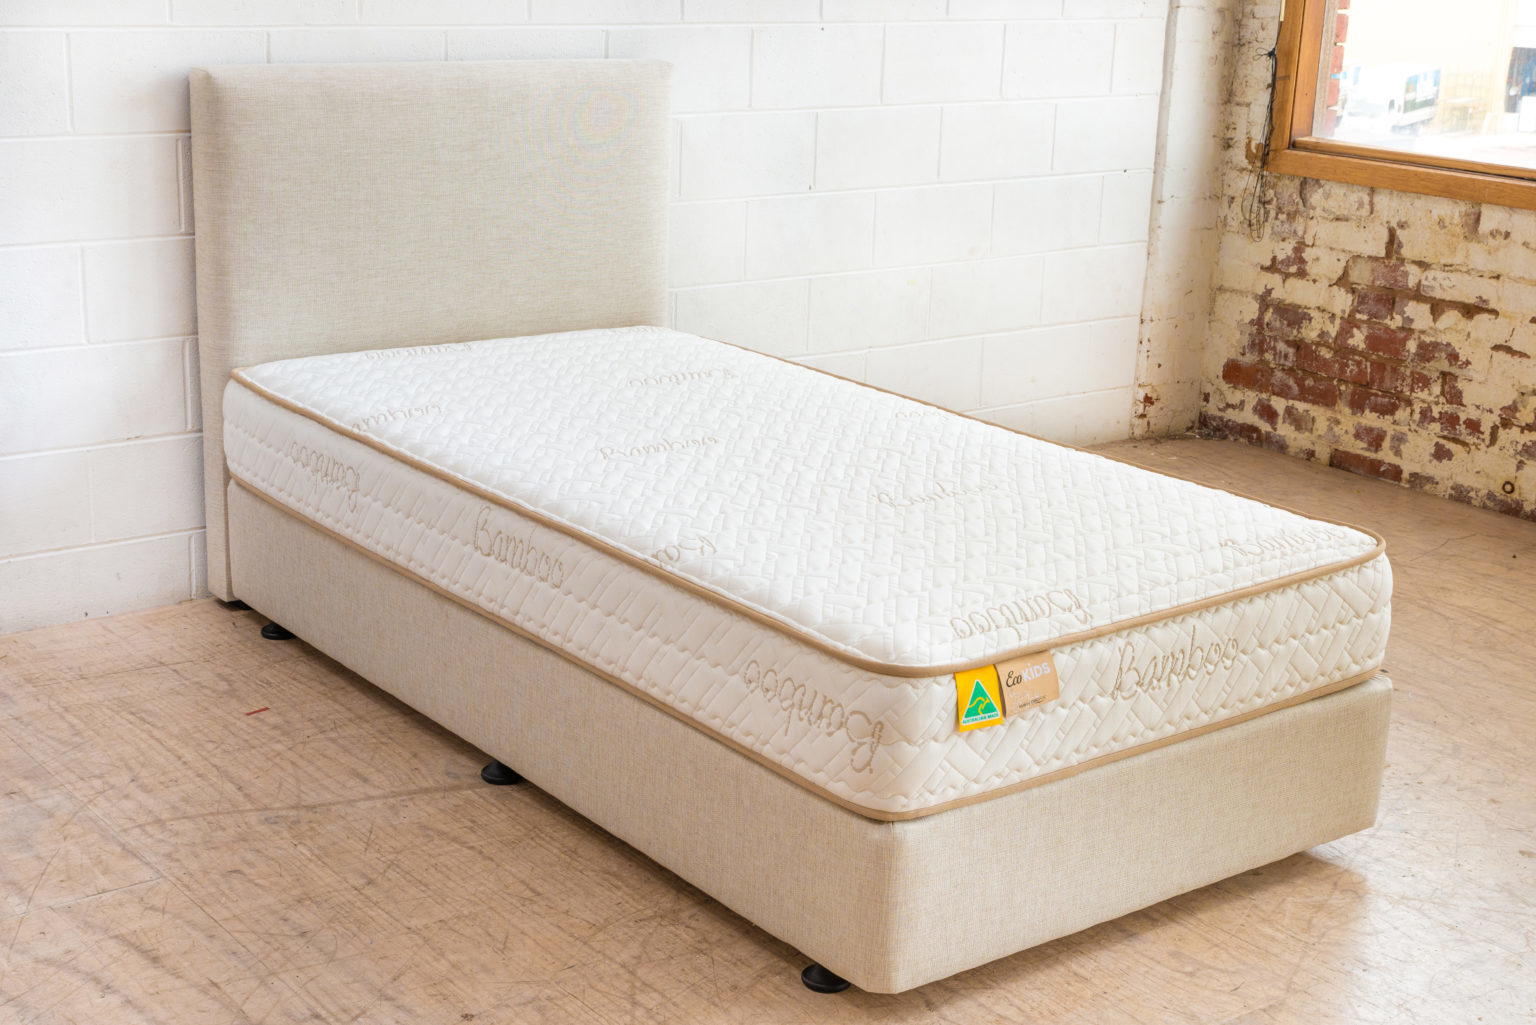 best mattress for kids in india